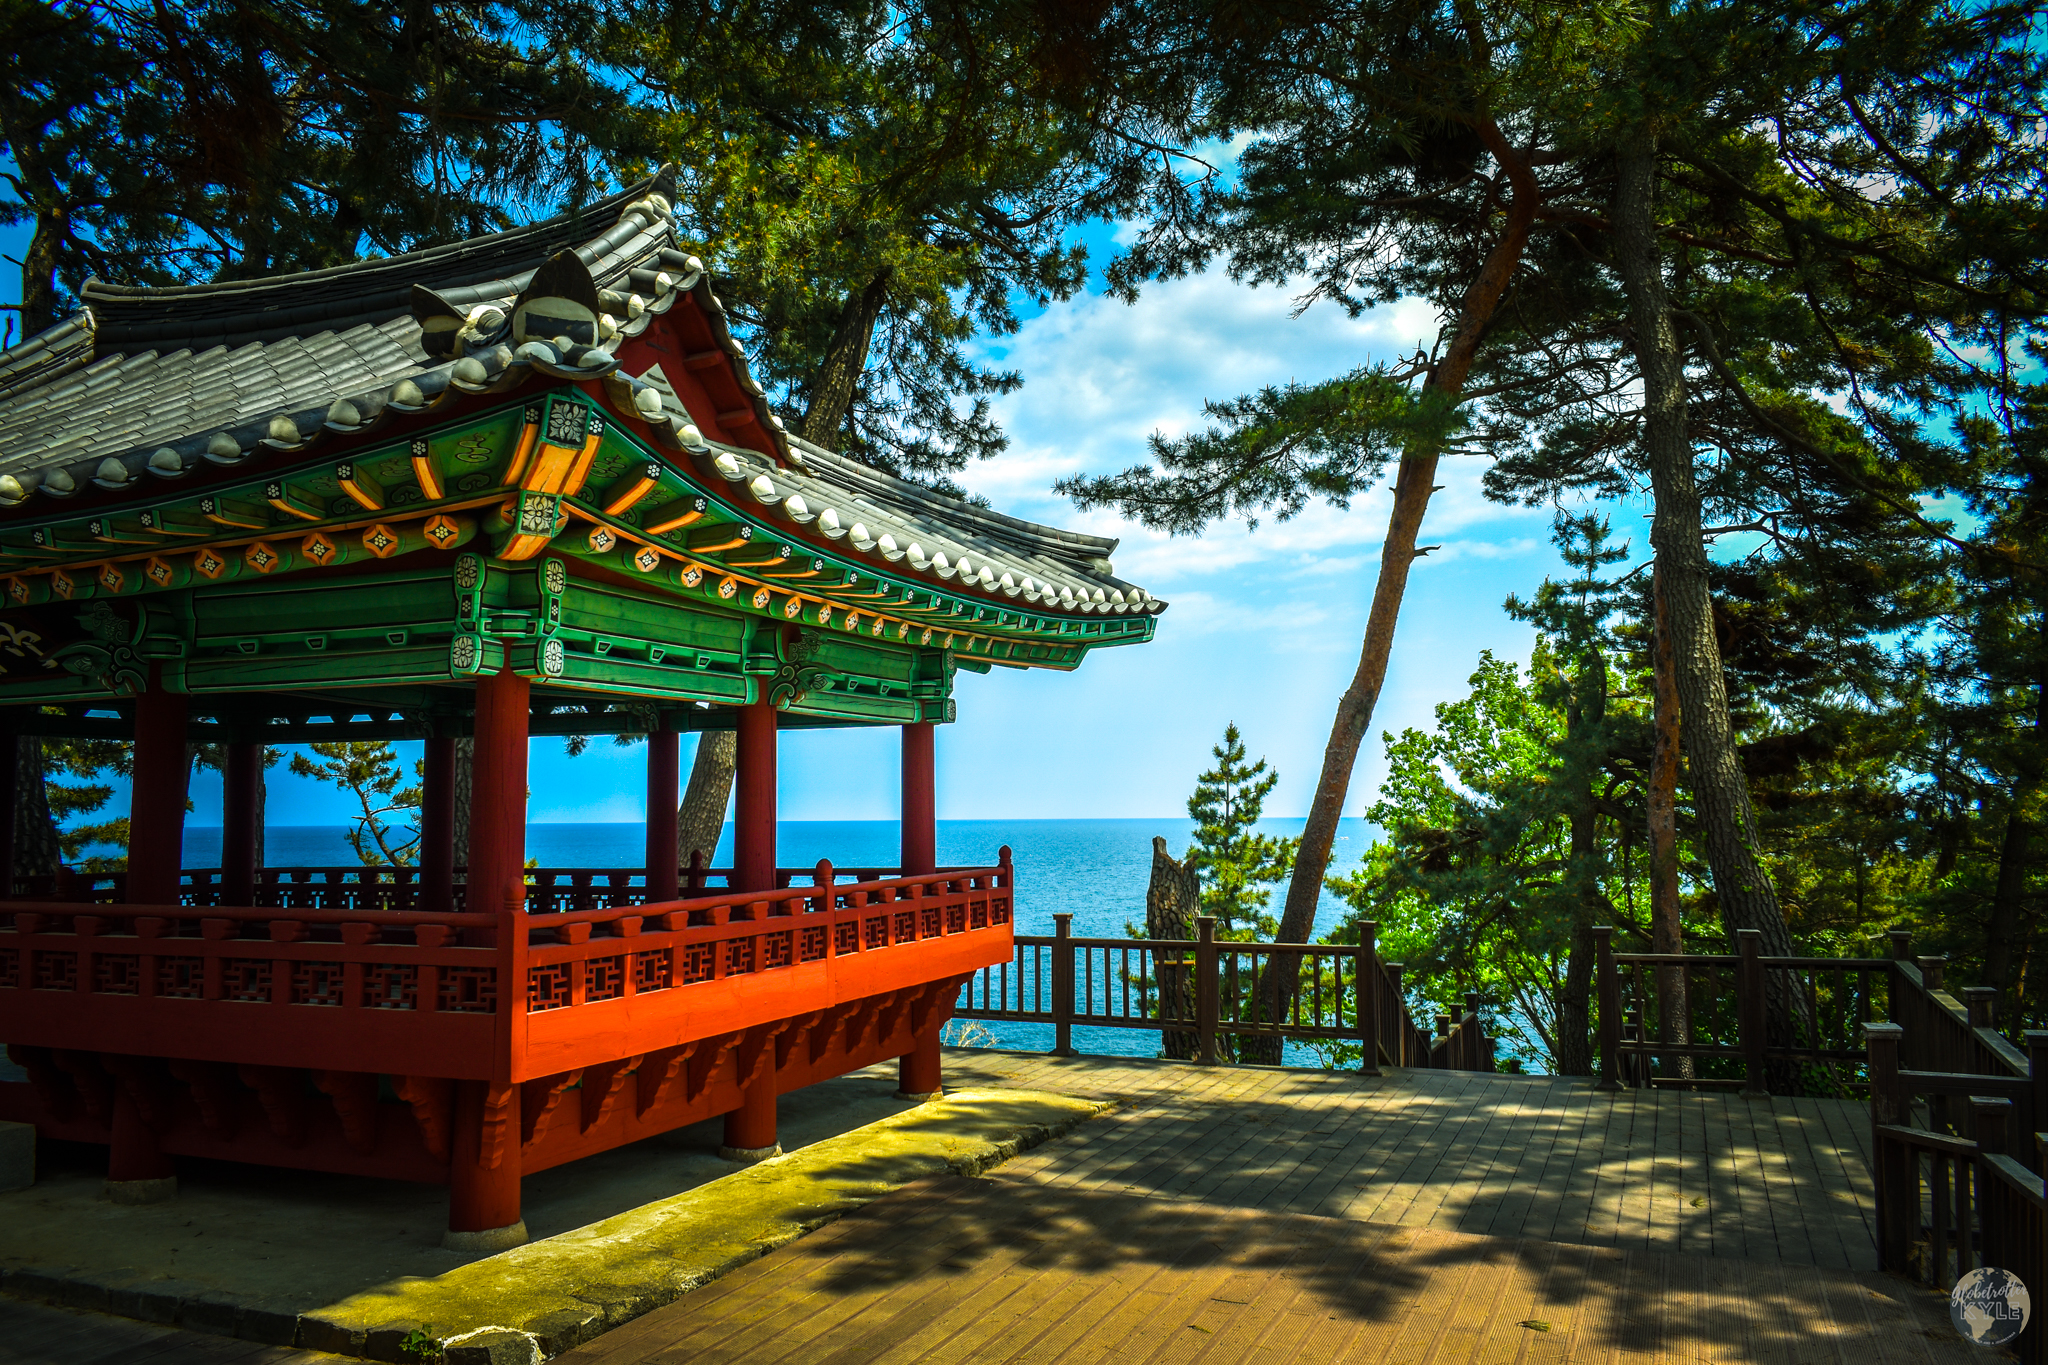 The brightly colored Jugdojeong Pavilion Korean pavilion rests under tall pine trees with the ocean in the background Guide for Sokcho and Seoraksan